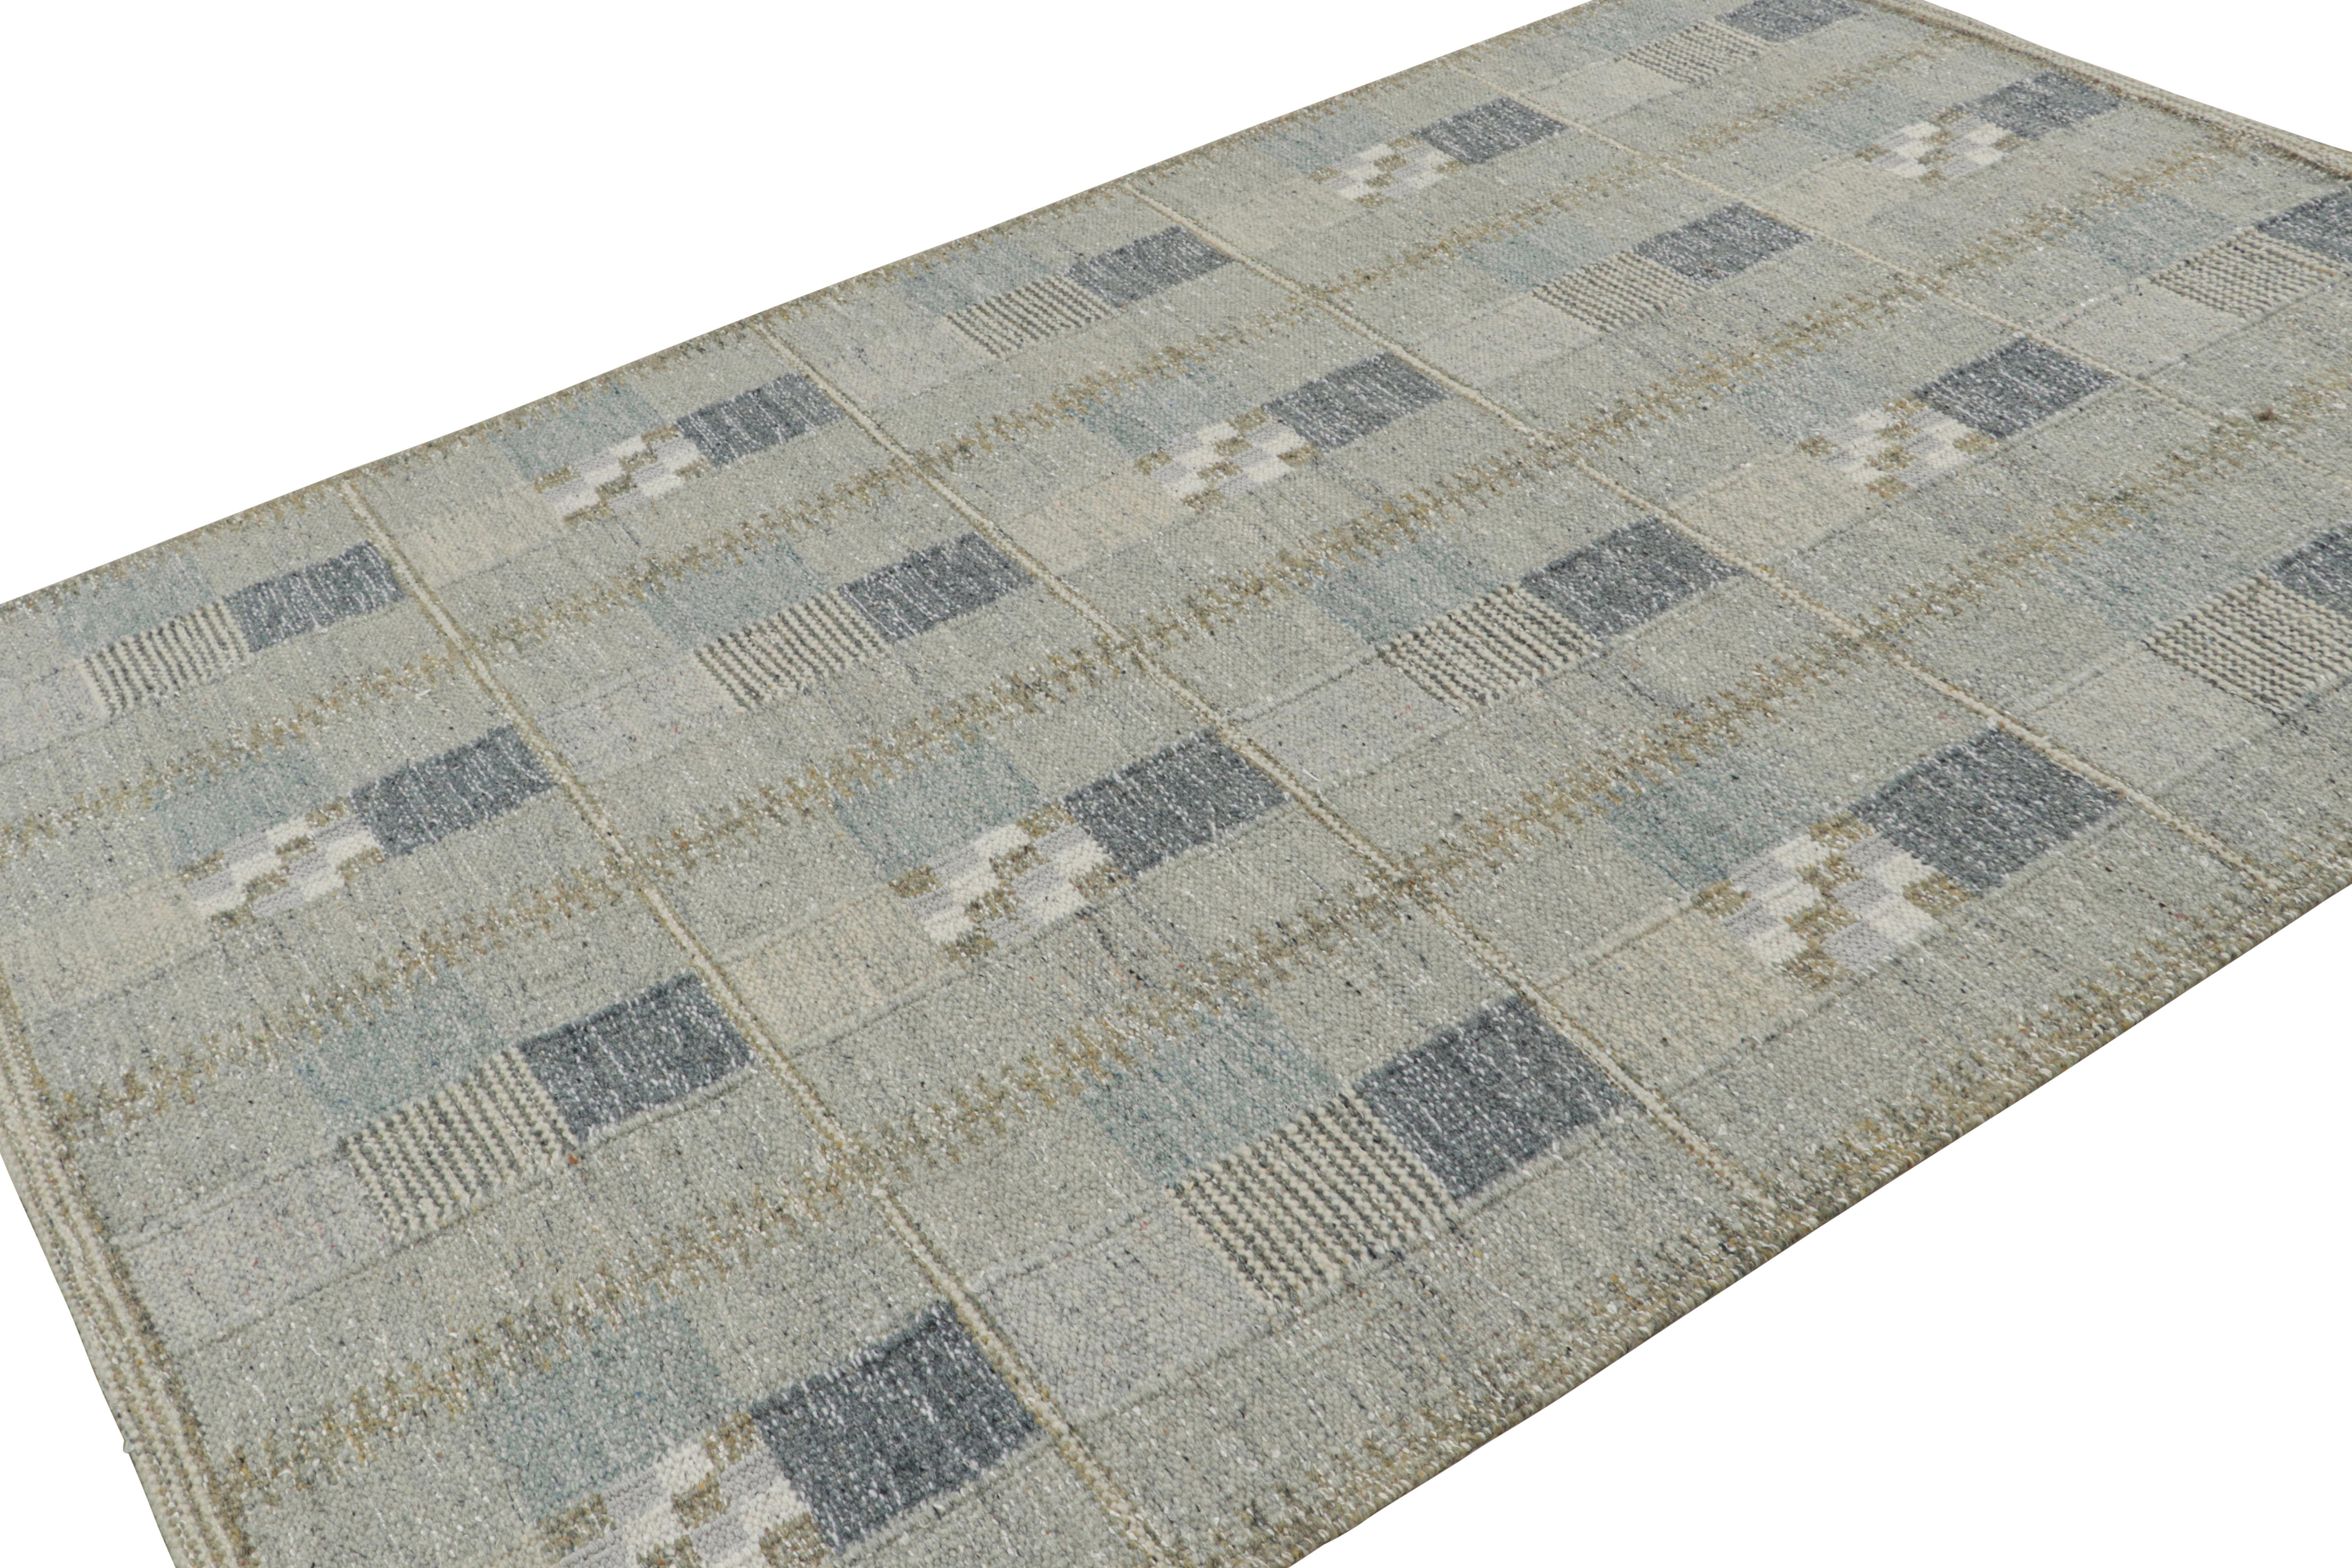 This 6x9 Swedish style kilim rug is from the award-winning Scandinavian rug collection by Rug & Kilim. Handwoven in wool and undyed, natural yarns, this flatweave is inspired by Swedish Deco Rollakan and Rya rugs.

On the Design: 

This rug enjoys